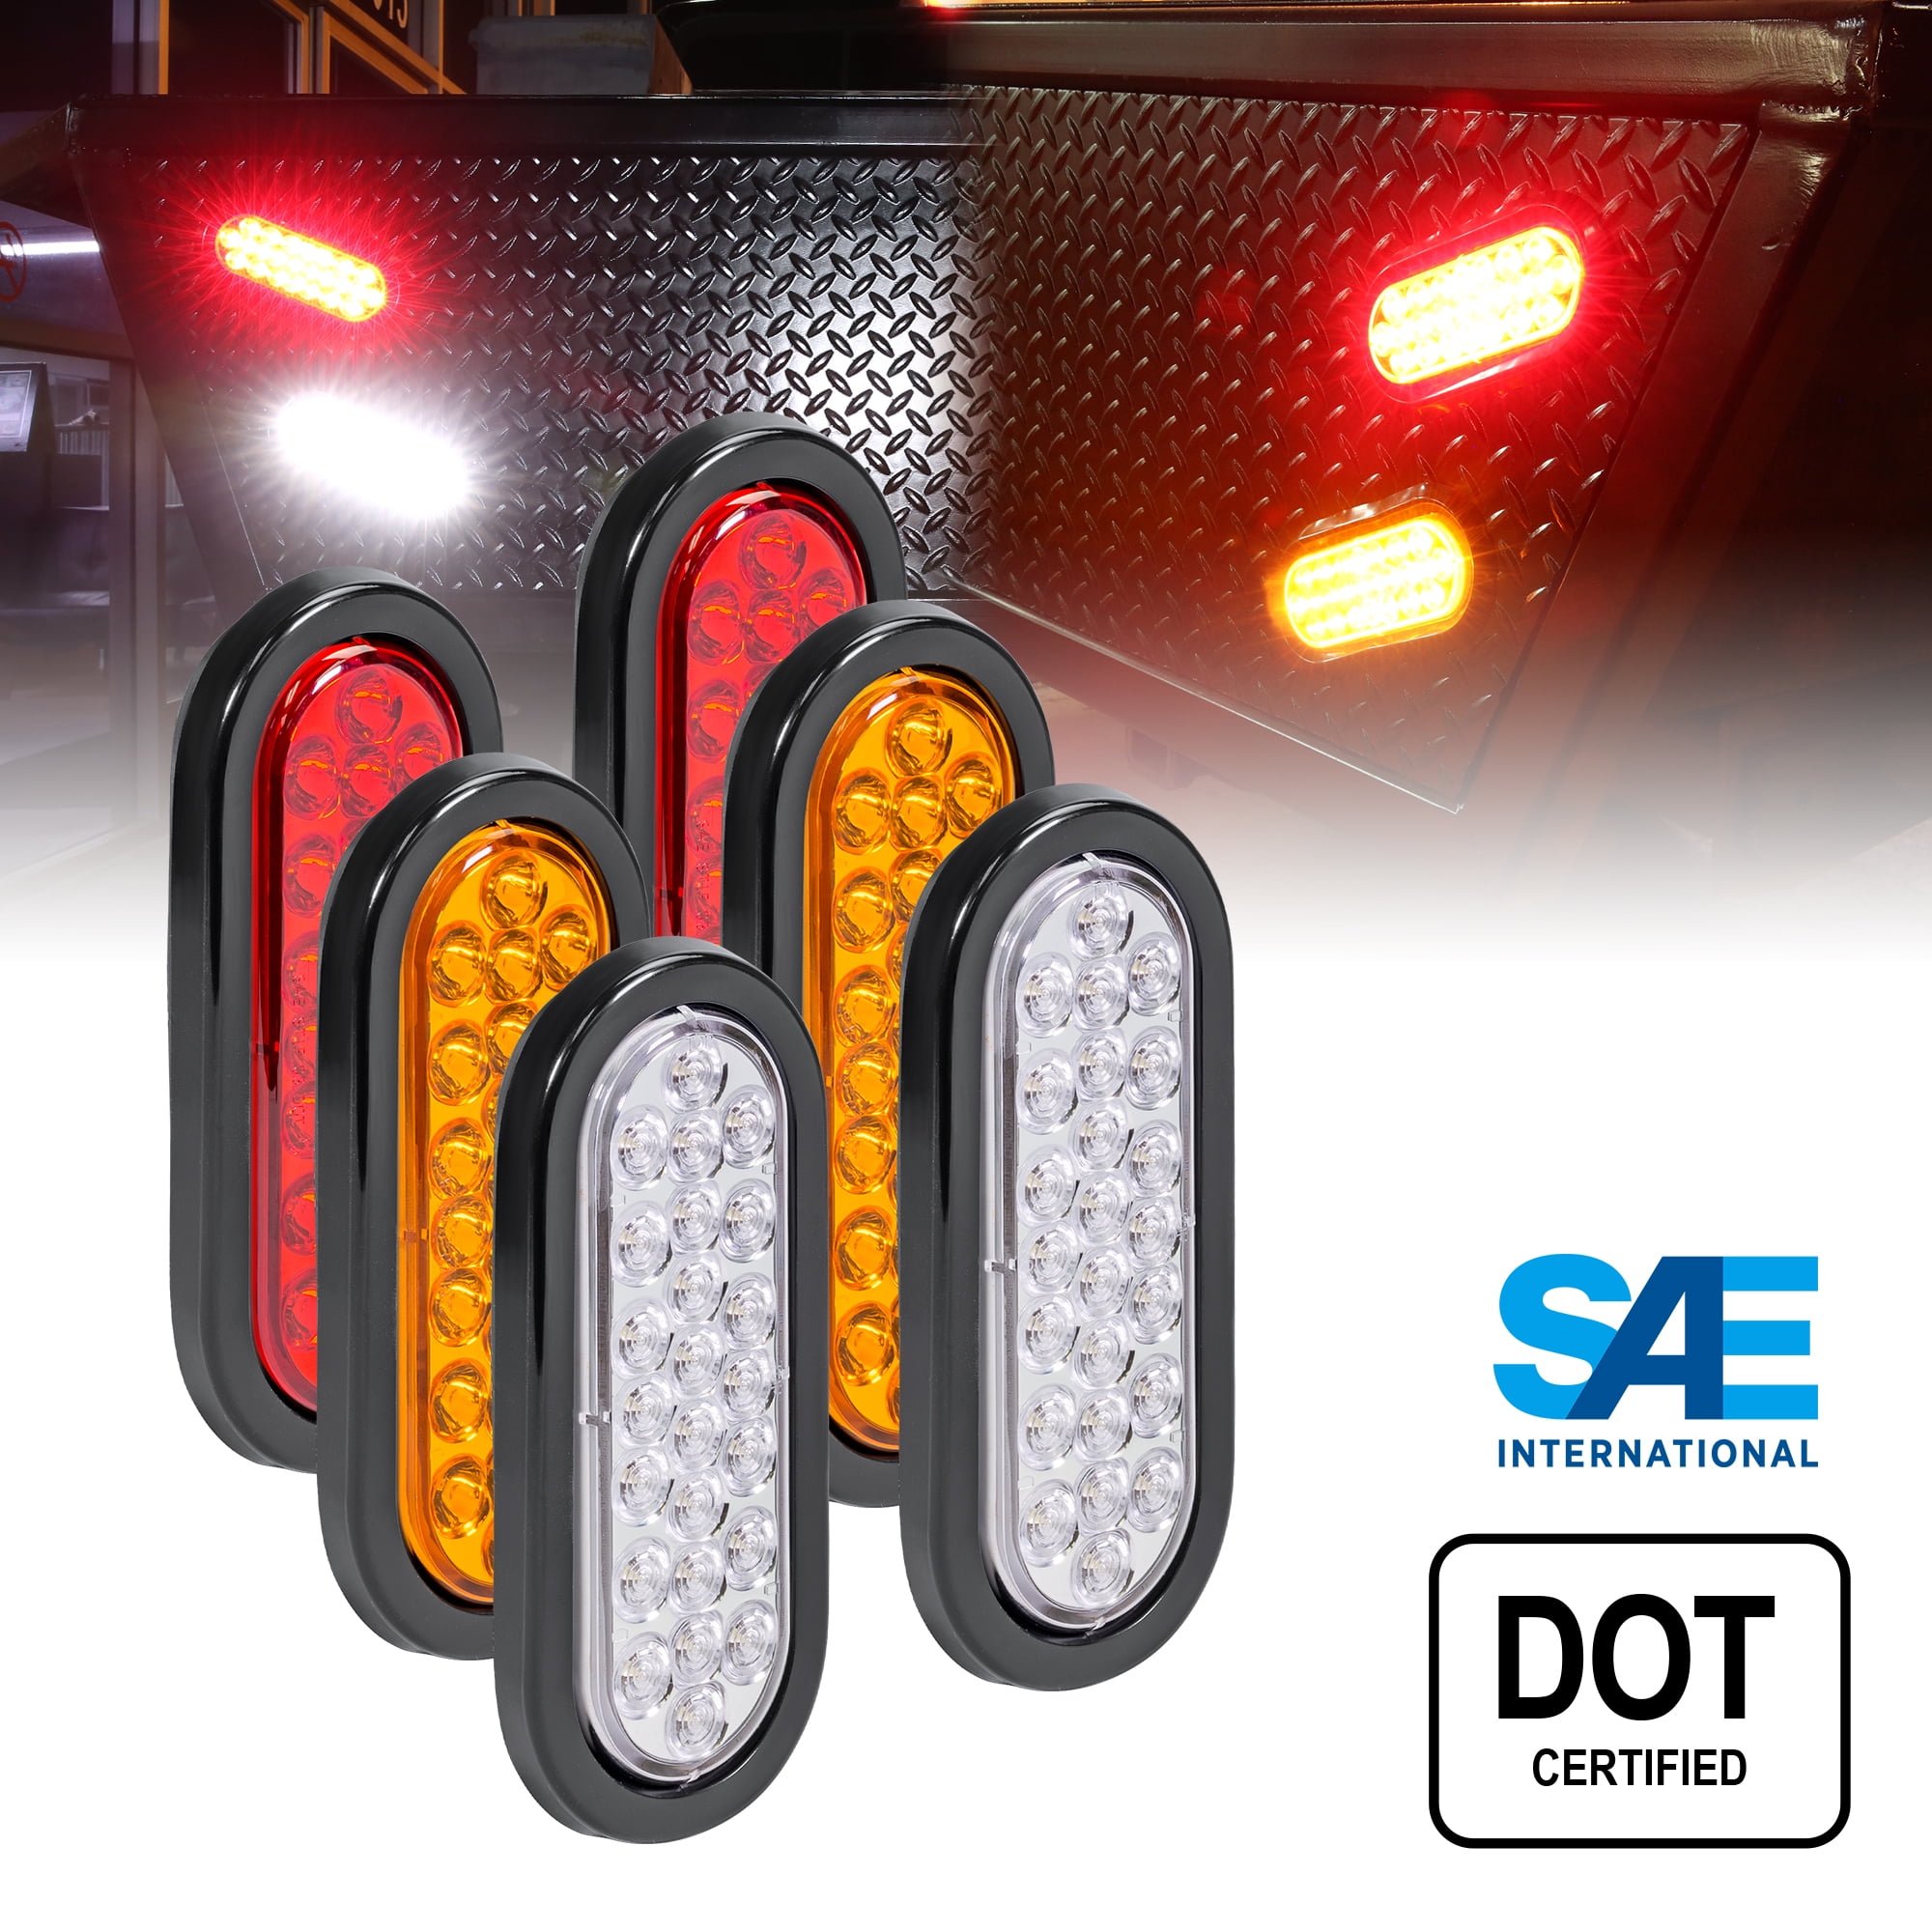 DOT Certified 2 White 6 Oval LED Trailer Tail Light Kit 4 Red Grommets & Plugs Included Stop Brake Turn Reverse Back Up Trailer Lights for RV Truck Jeep IP67 Waterproof 